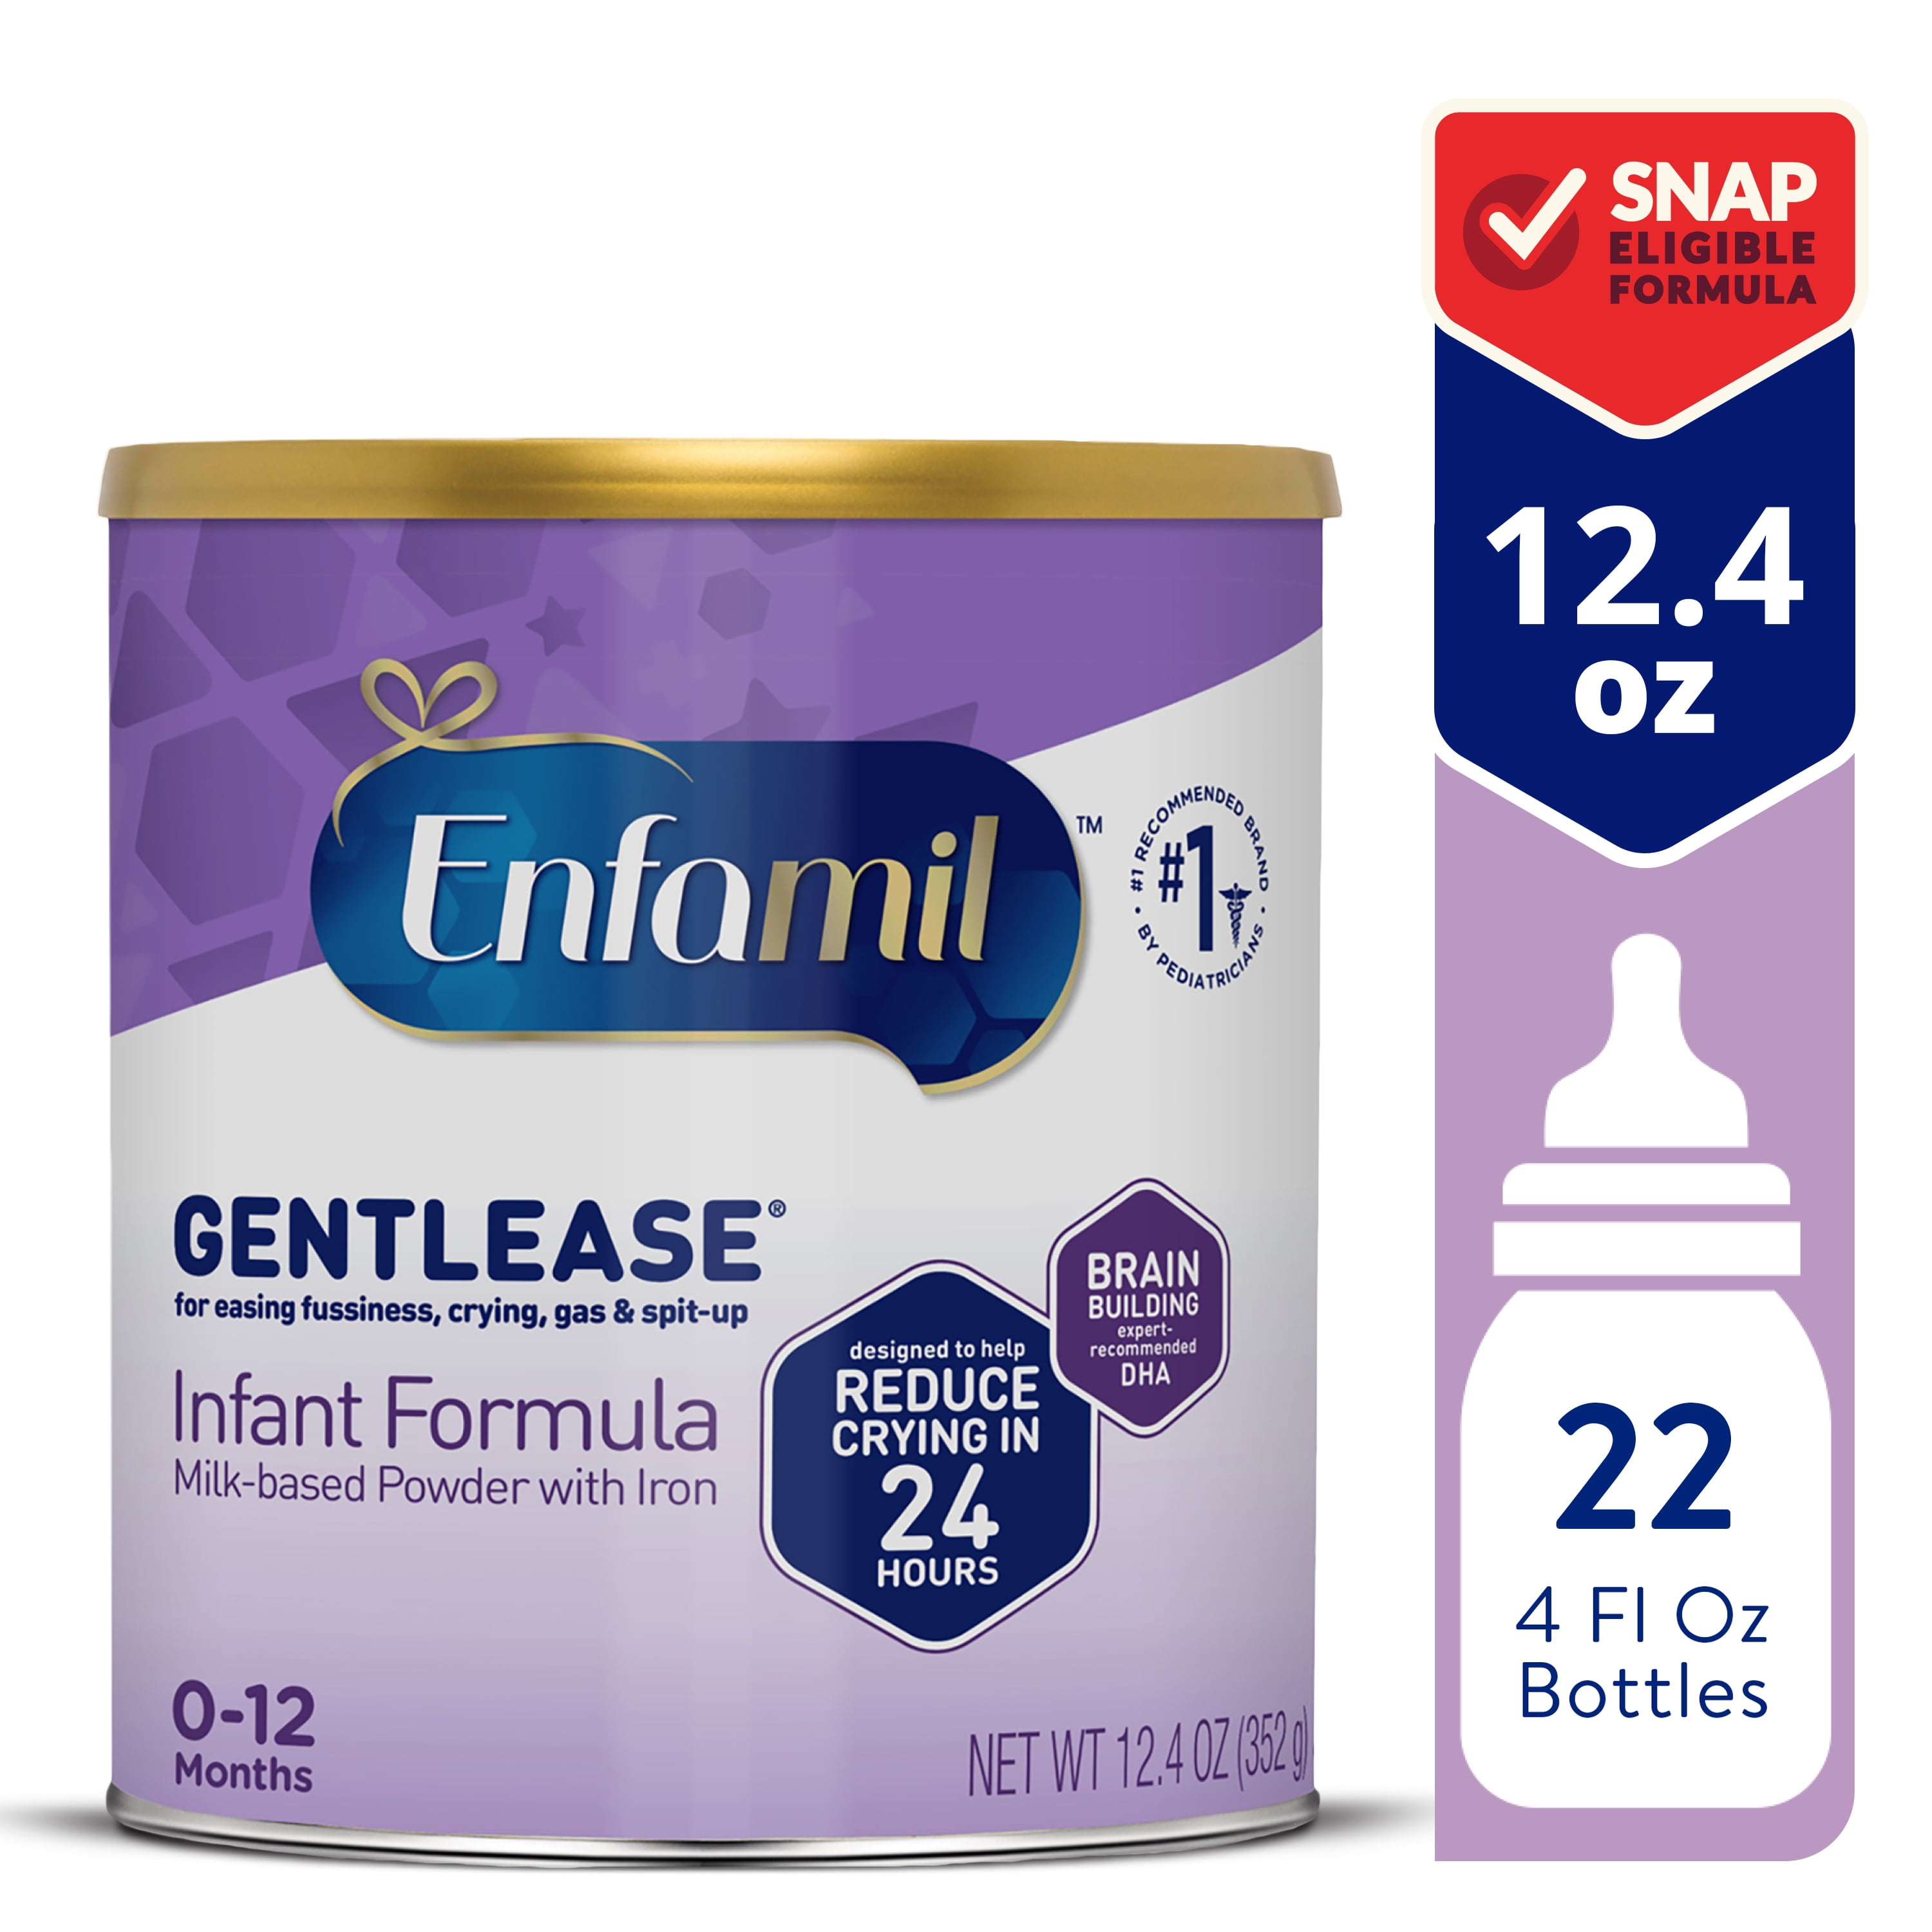 Enfamil Gentlease Baby Formula, Reduces Fussiness, Gas, Crying and Spit-up  in 24 hours, DHA & Choline to support Brain development, Powder Can,   Oz 